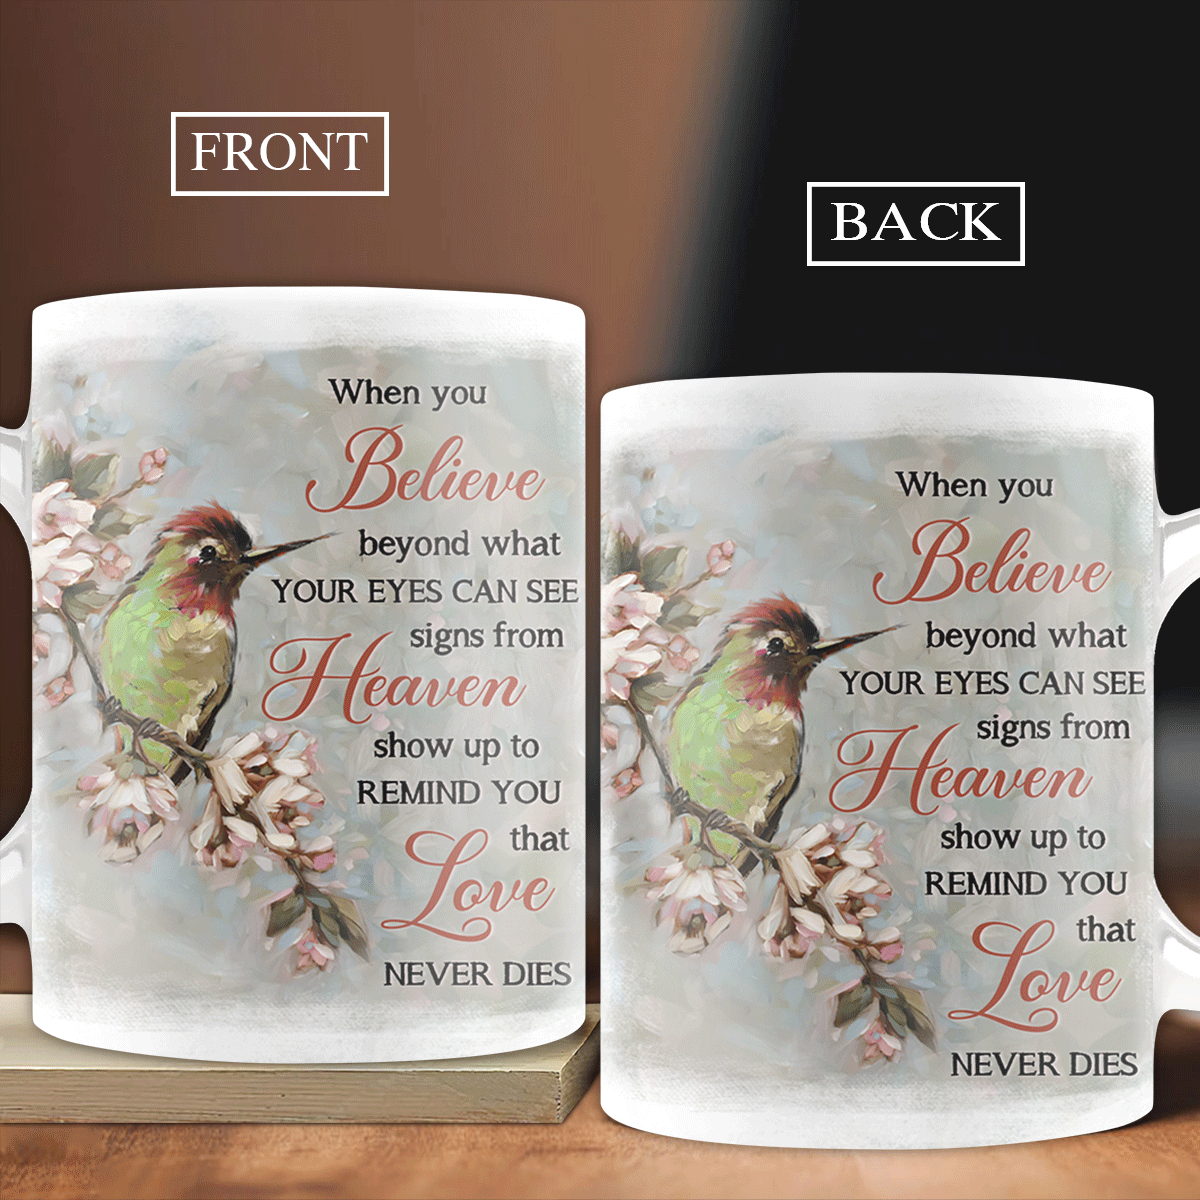 Memorial White Mug - Cherry blossom painting, Colorful hummingbird - Gift for members family - Signs from heaven remind you love never dies  - Heaven White Mug.